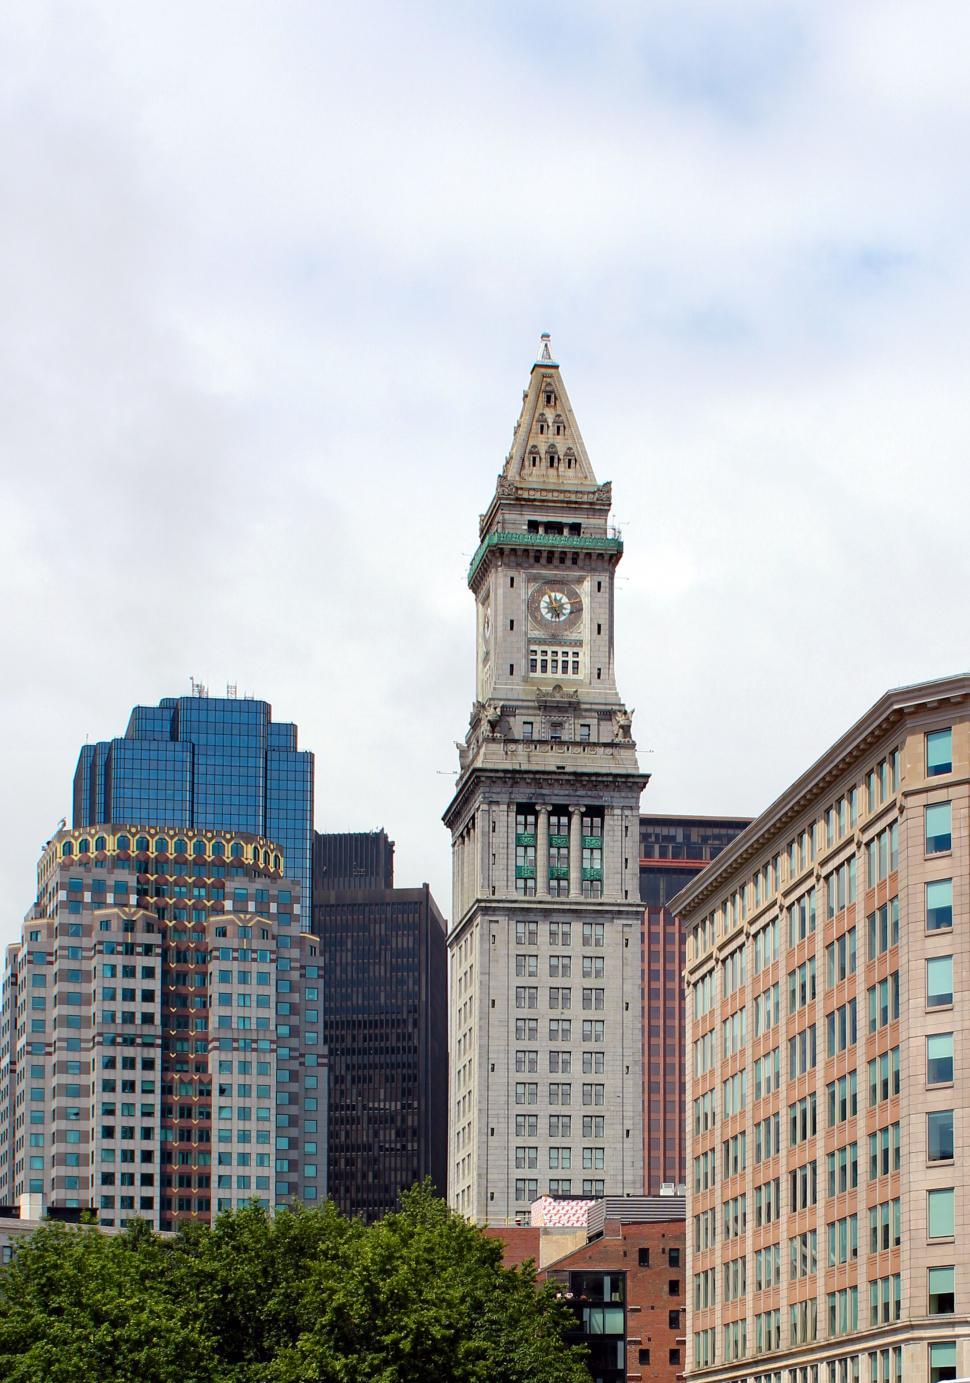 Free Image of Historic clock tower among modern skyscrapers 